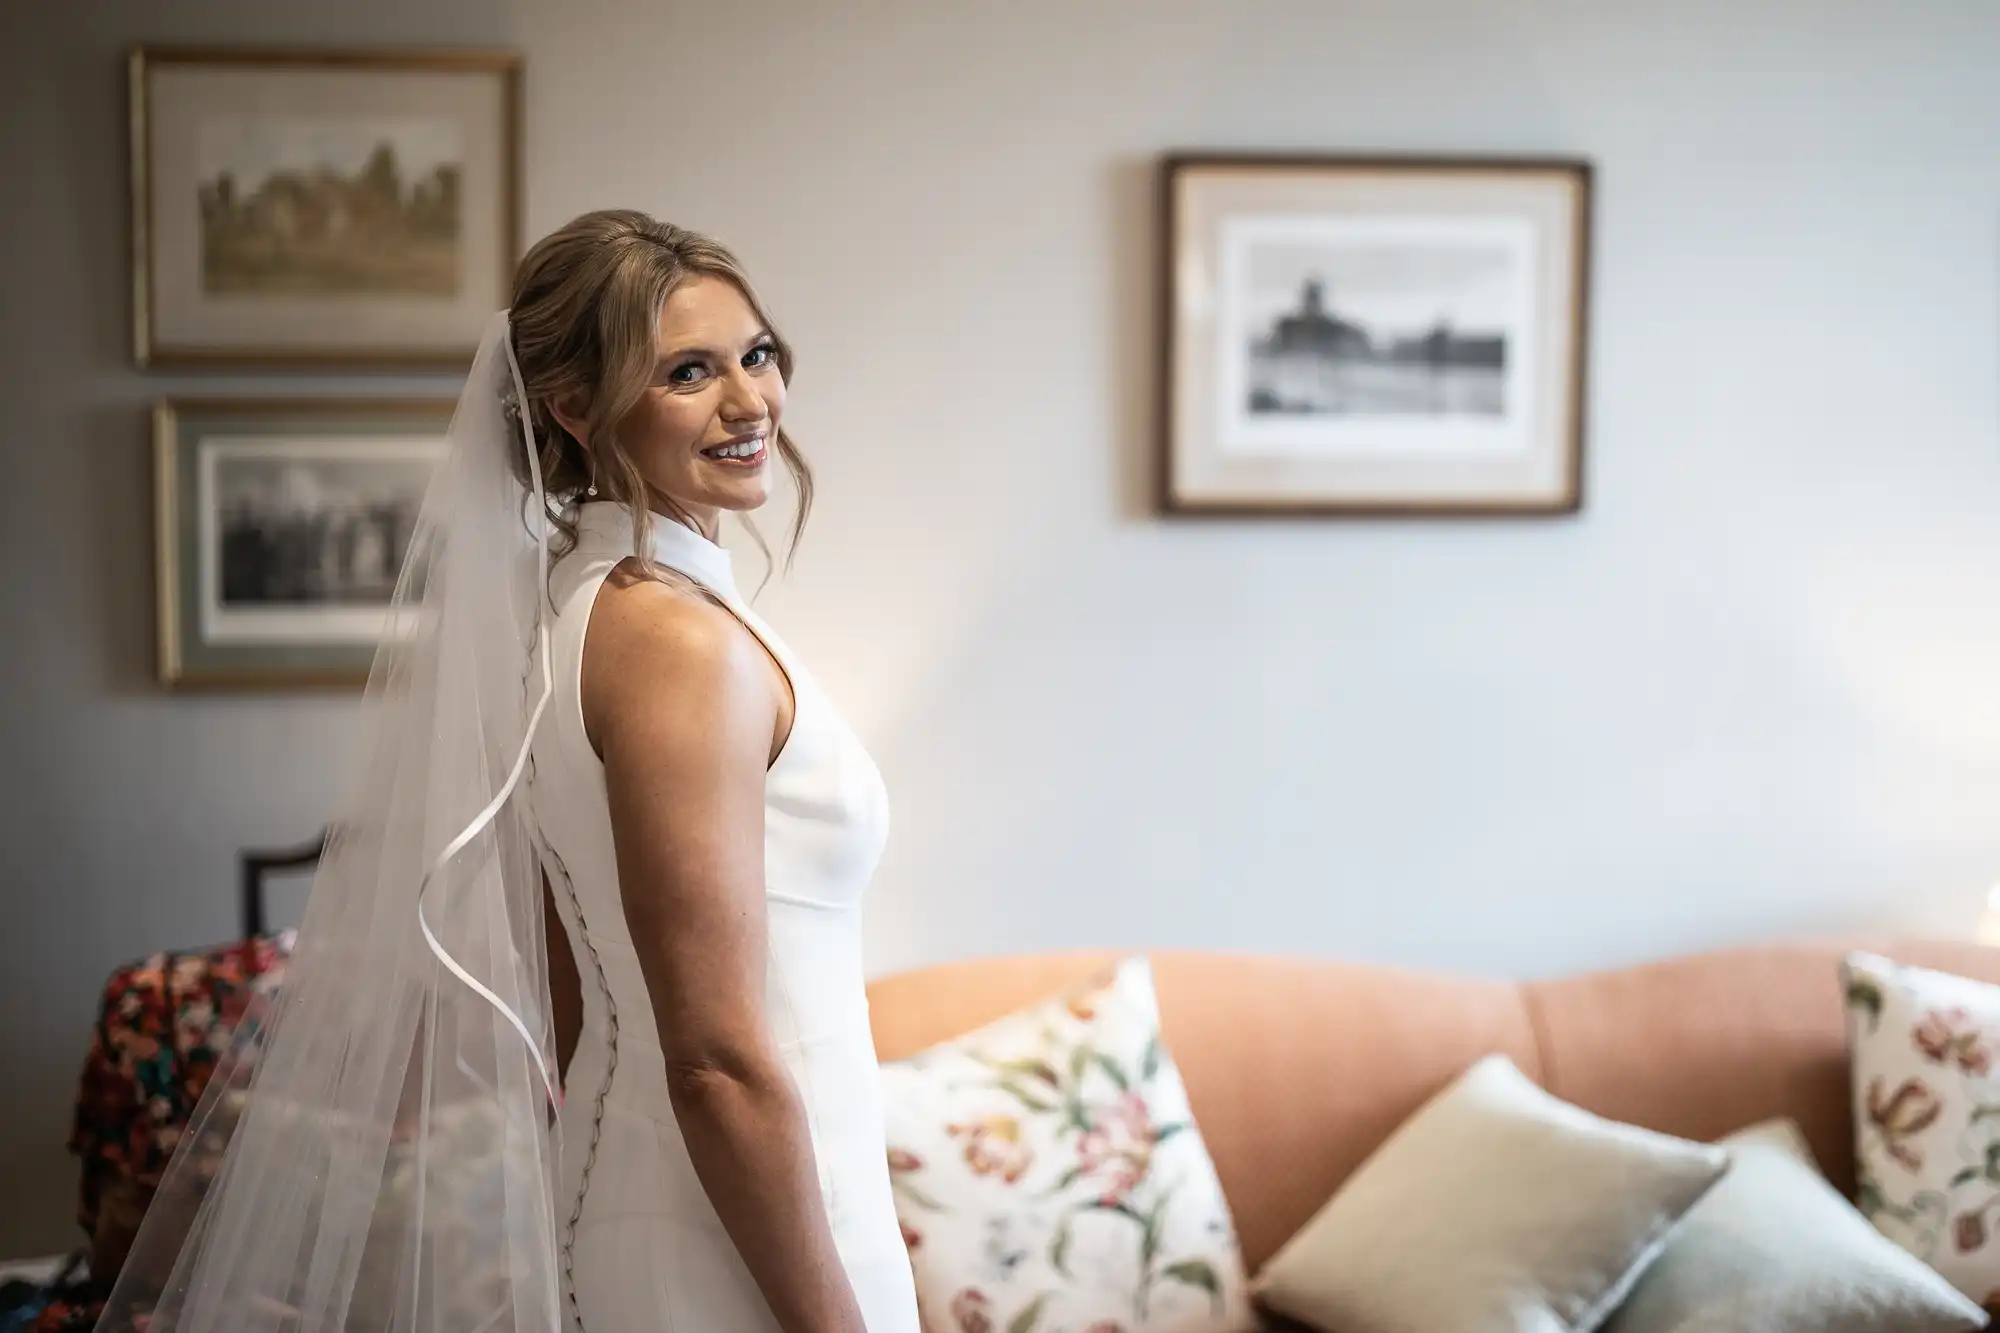 A bride in a white dress and veil smiles over her shoulder in a warmly lit room with elegant decor and paintings.